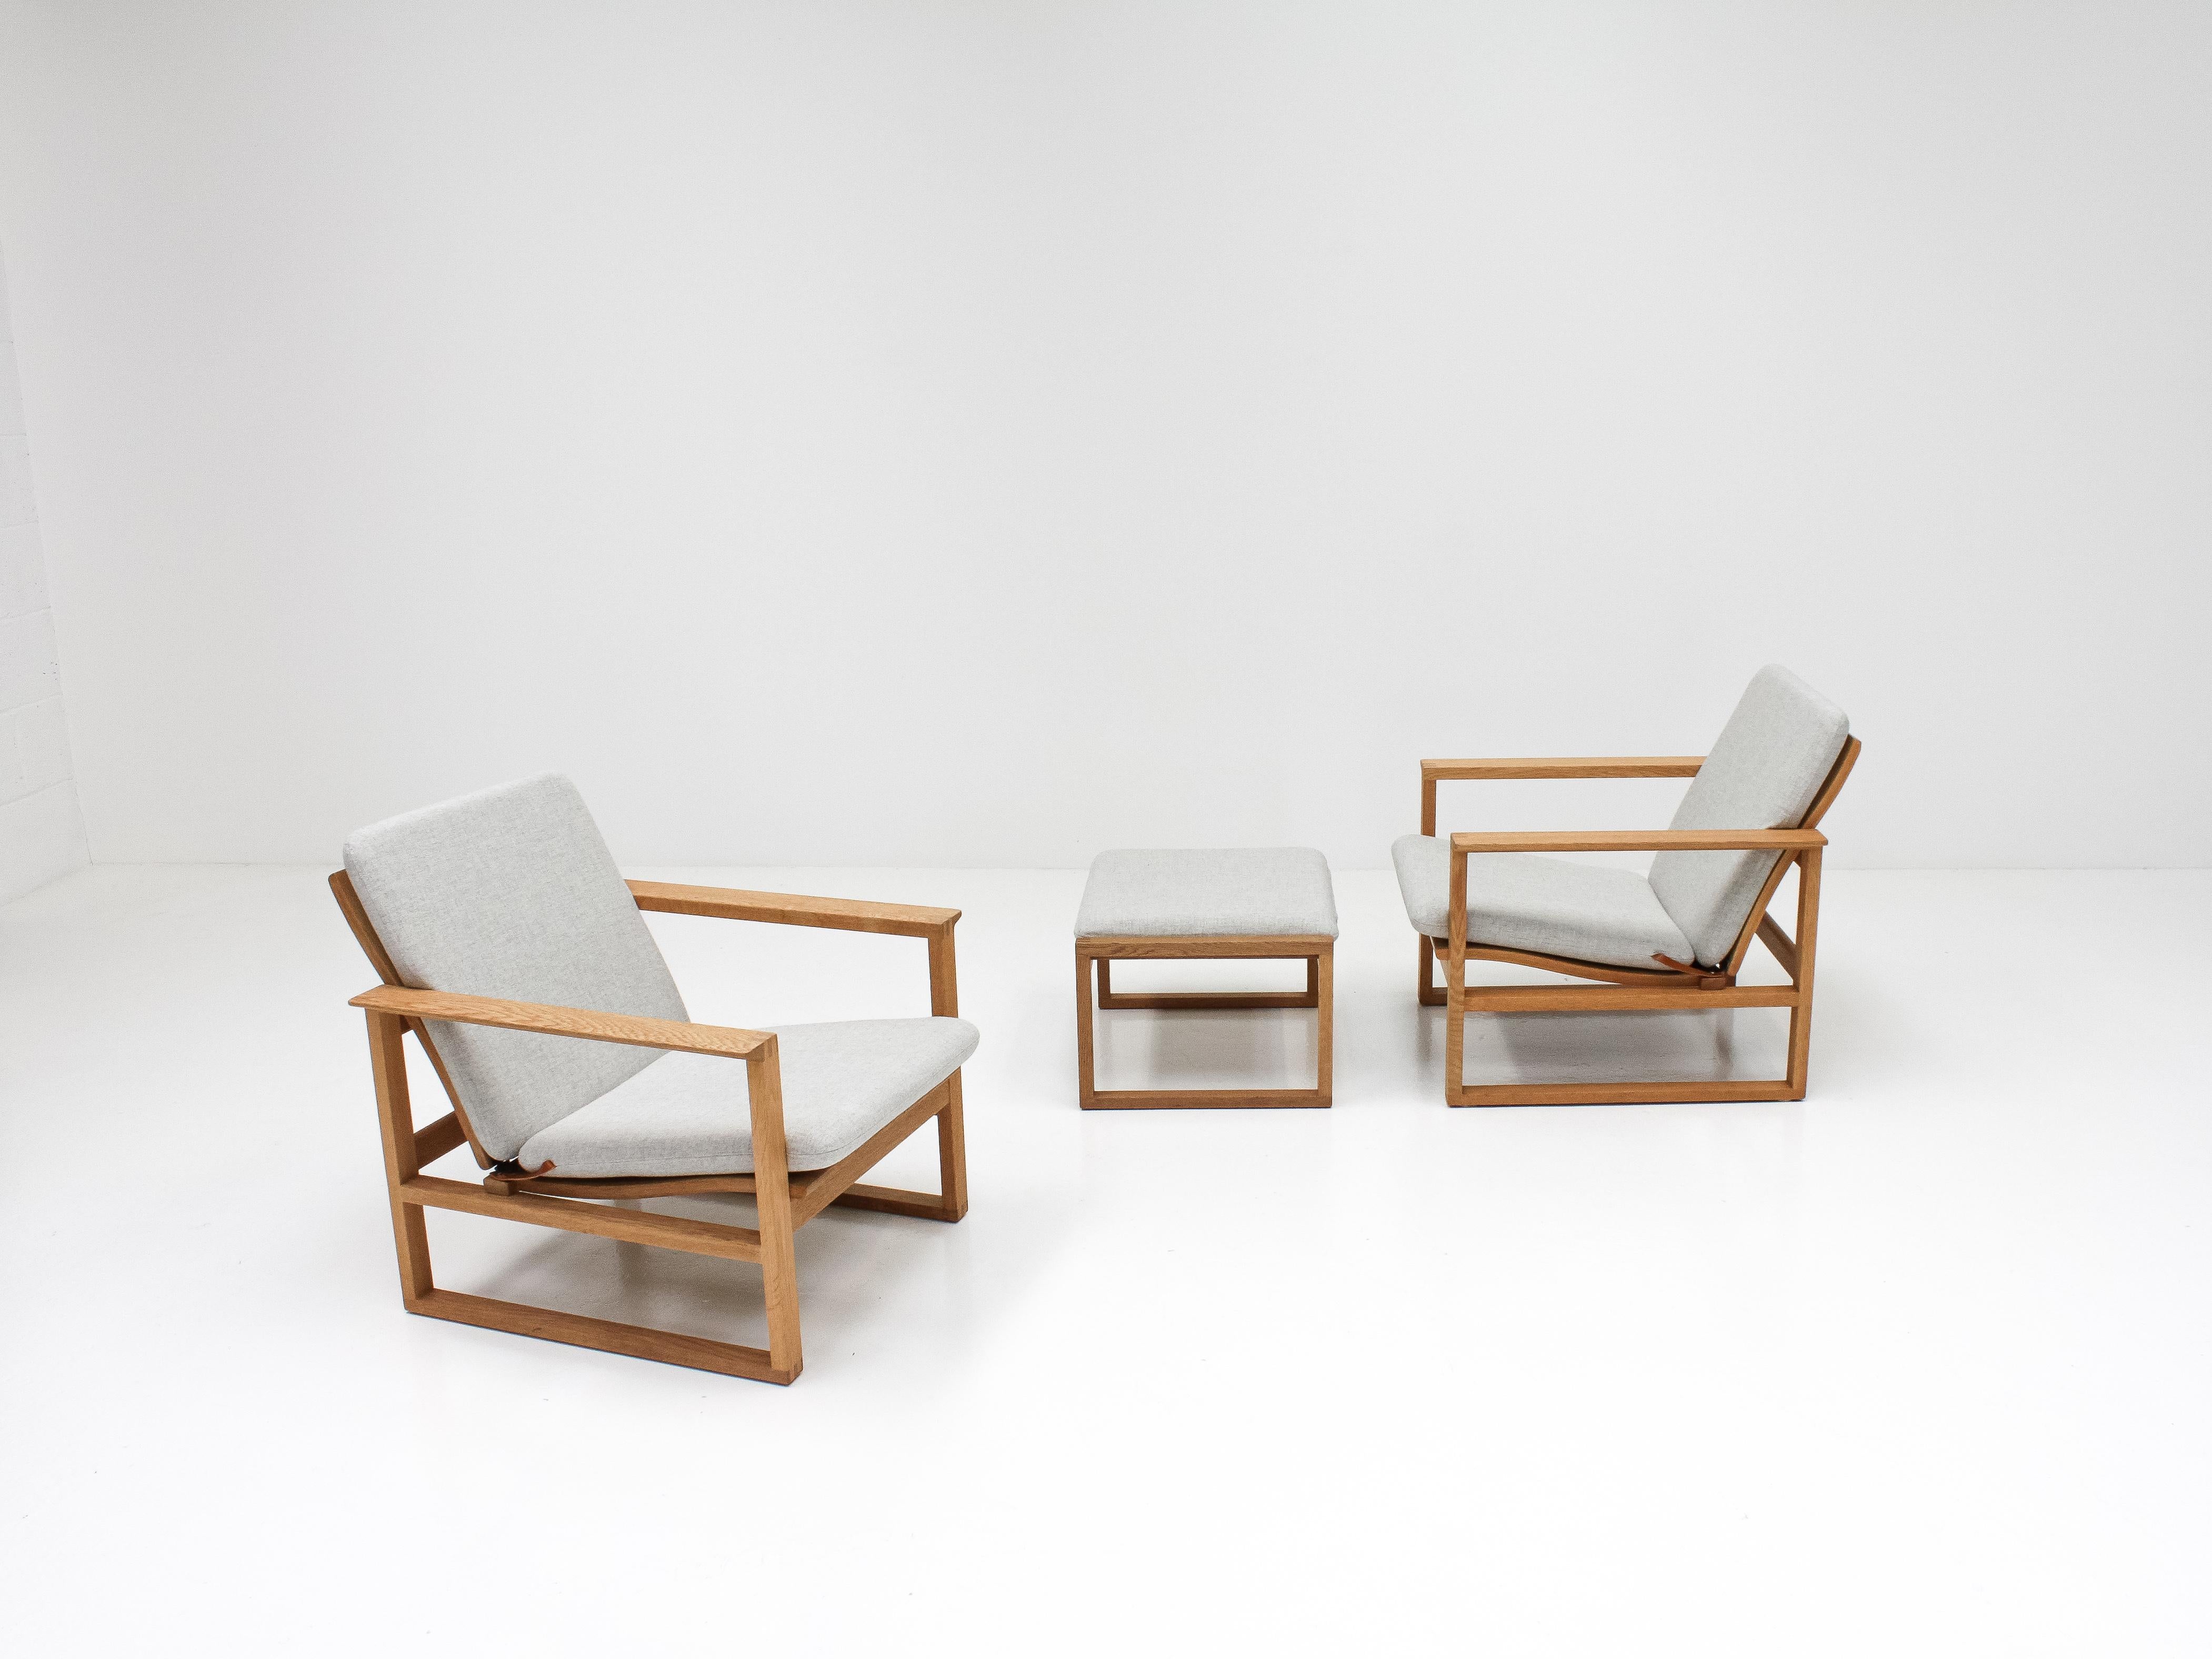 A pair of Børge Mogensen lounge chairs with footstool designed in 1956, model number 2256 for Fredericia Stolefabrik. 

The chairs consist of cubical frames made of solid oak with finger joints. Newly reupholstered in Kvadrat Tonica, a beautiful